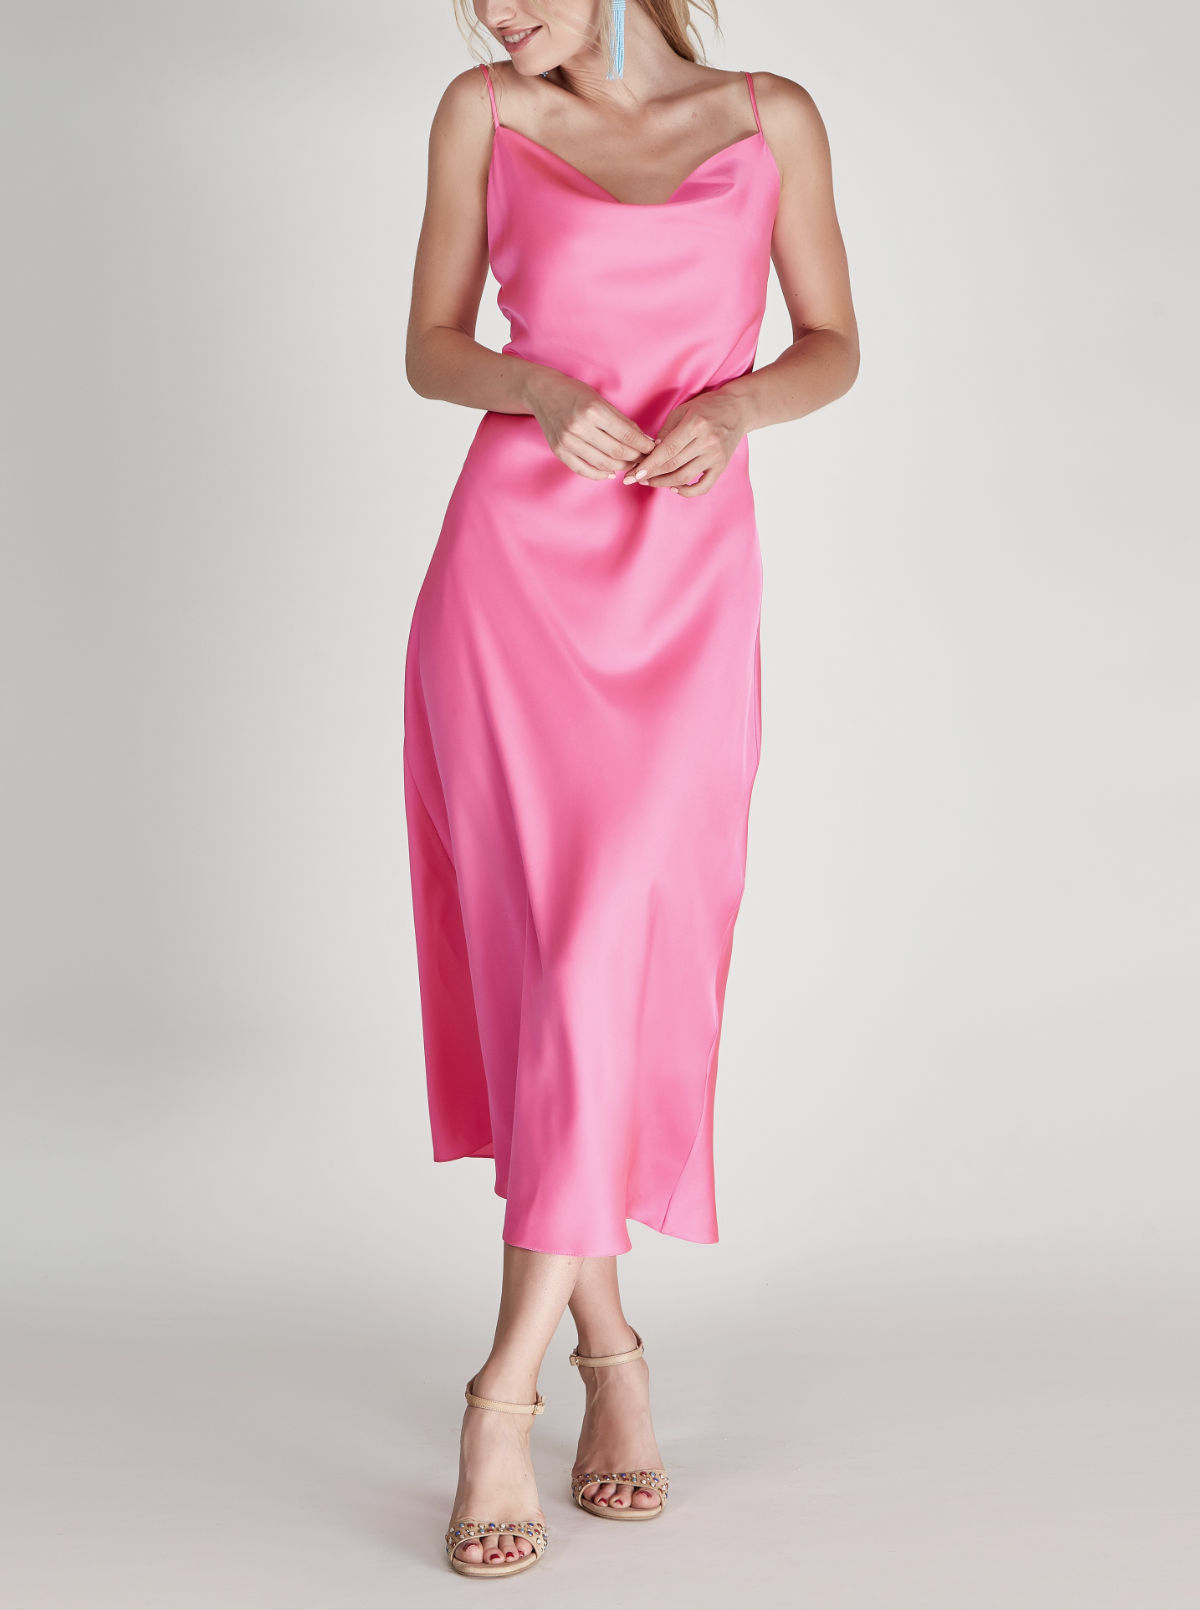 lime green and hot pink bridesmaid dresses